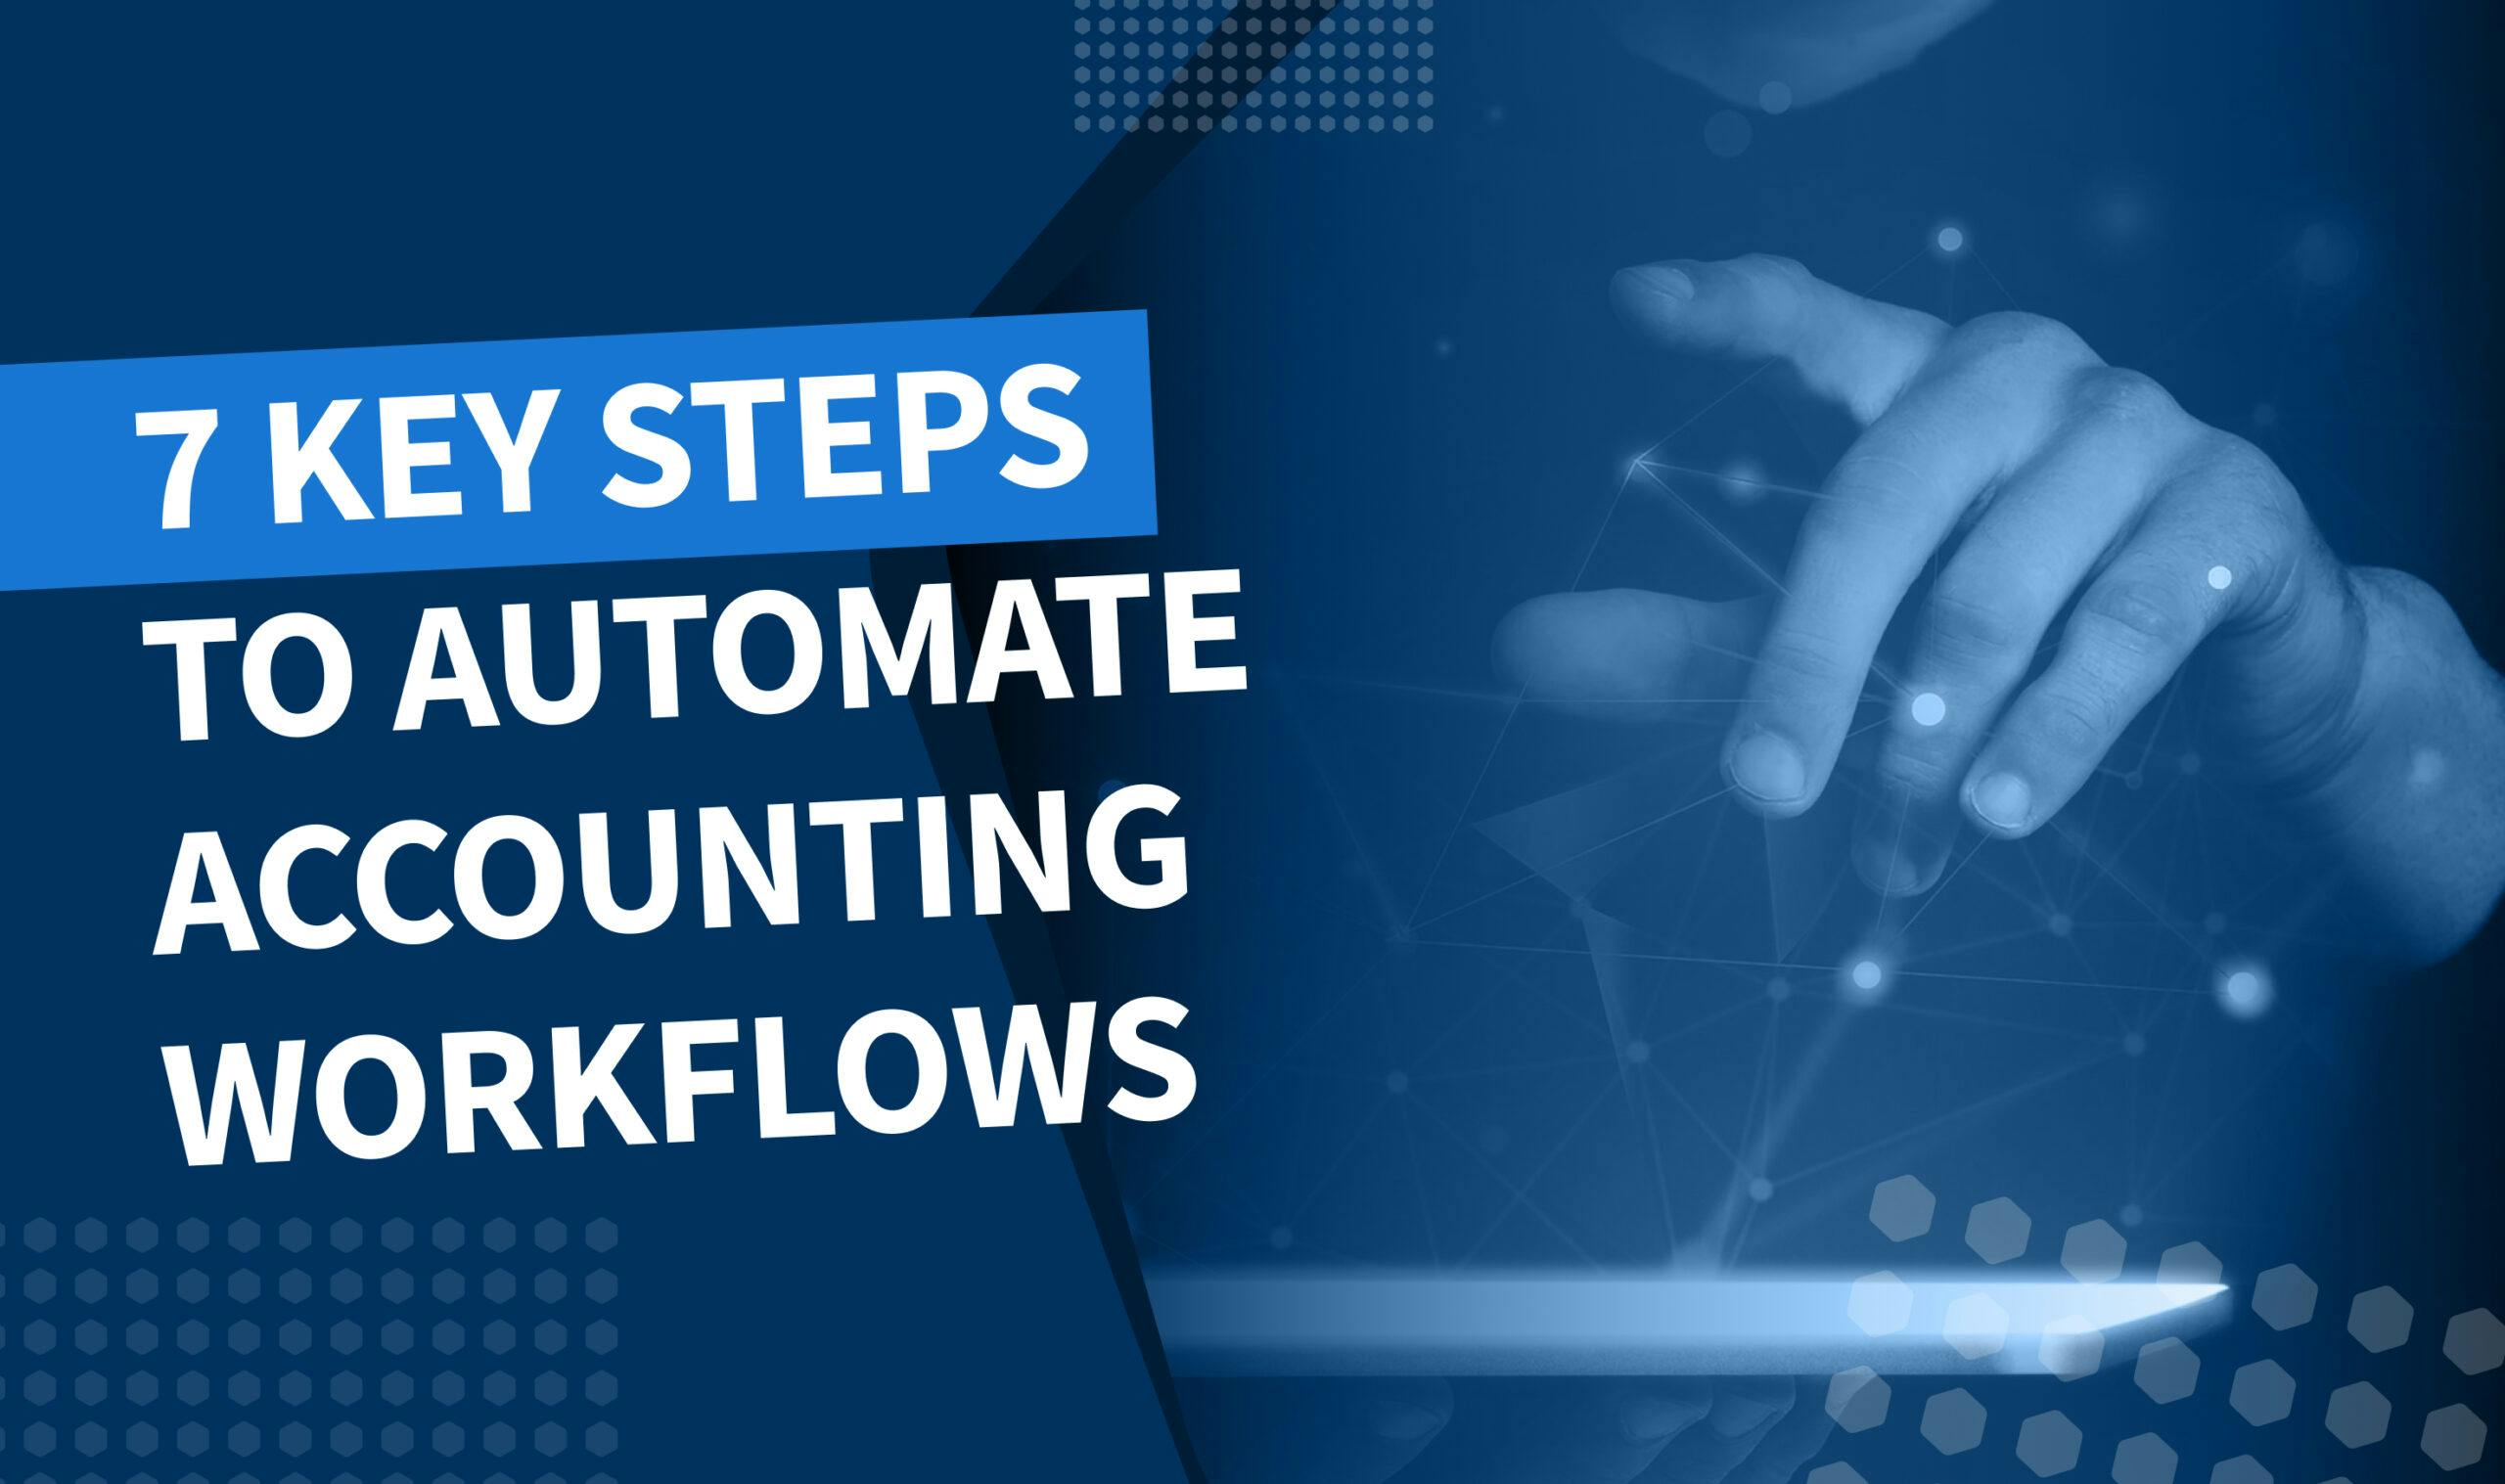 7 key steps to automate accounting workflow - Banner